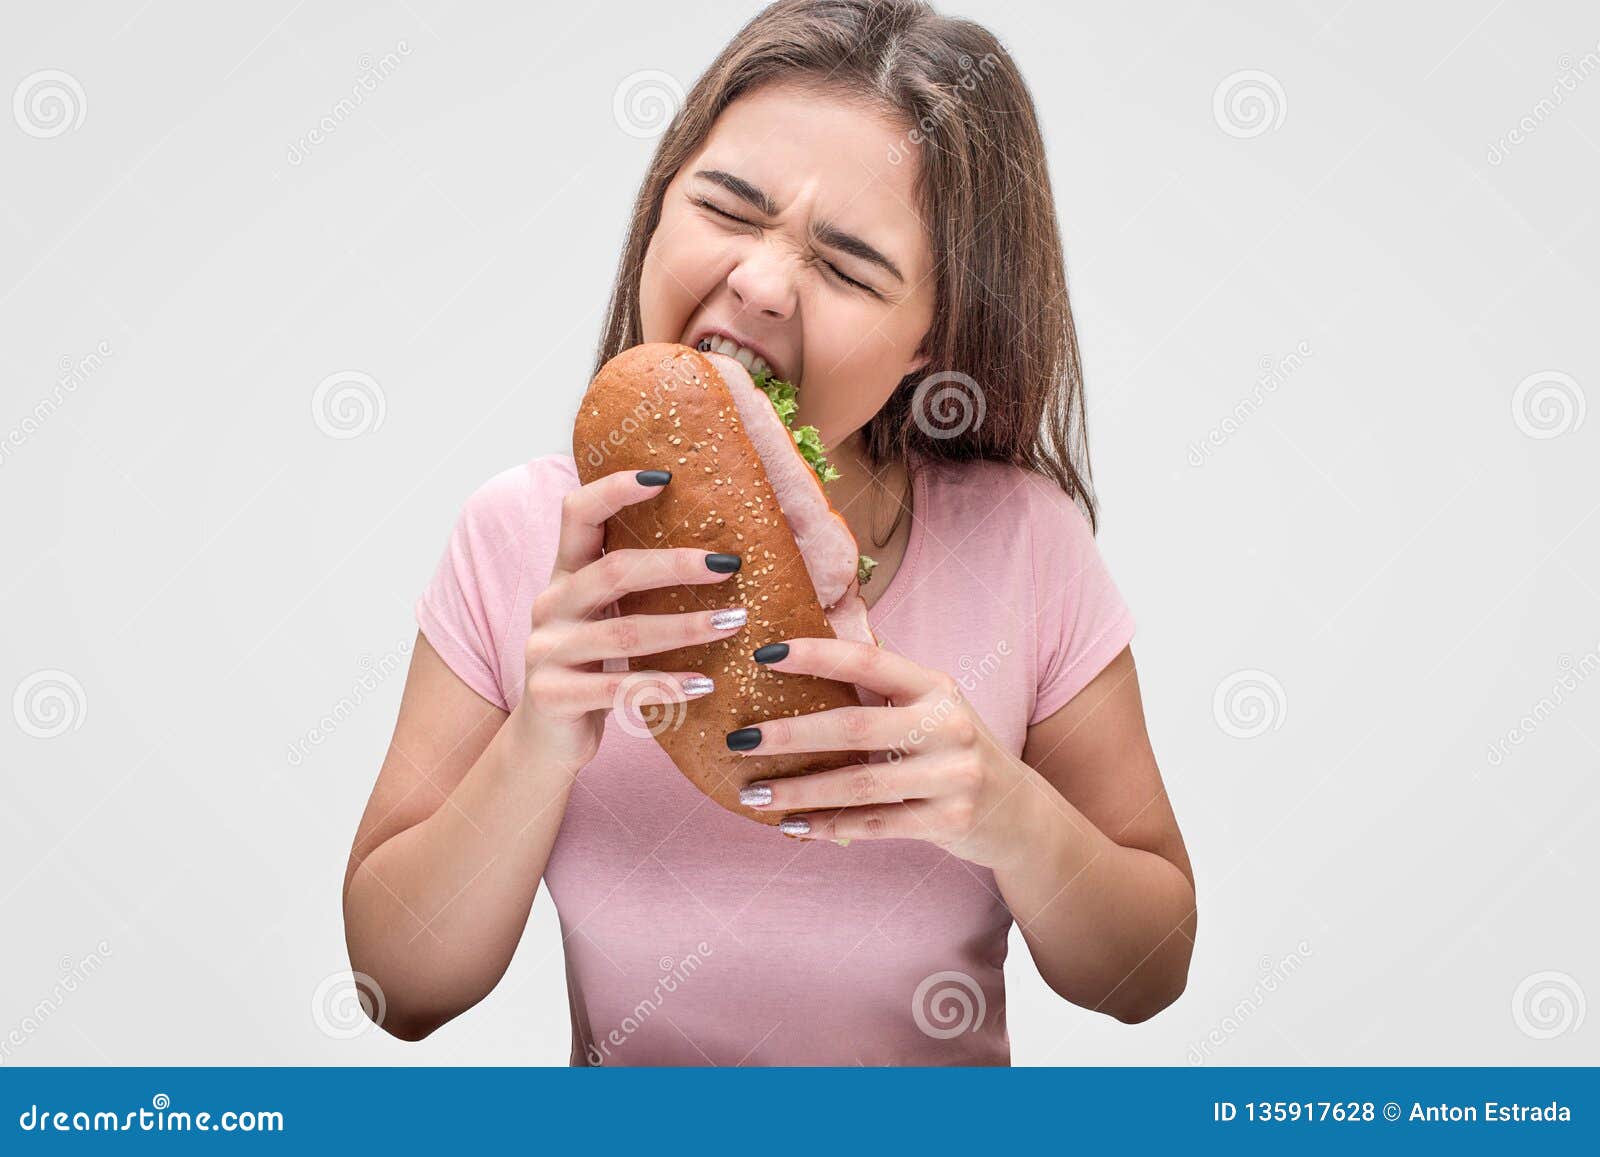 young woman devour sandwich. she hold it in hands and keep eyes closed.  on grey background.